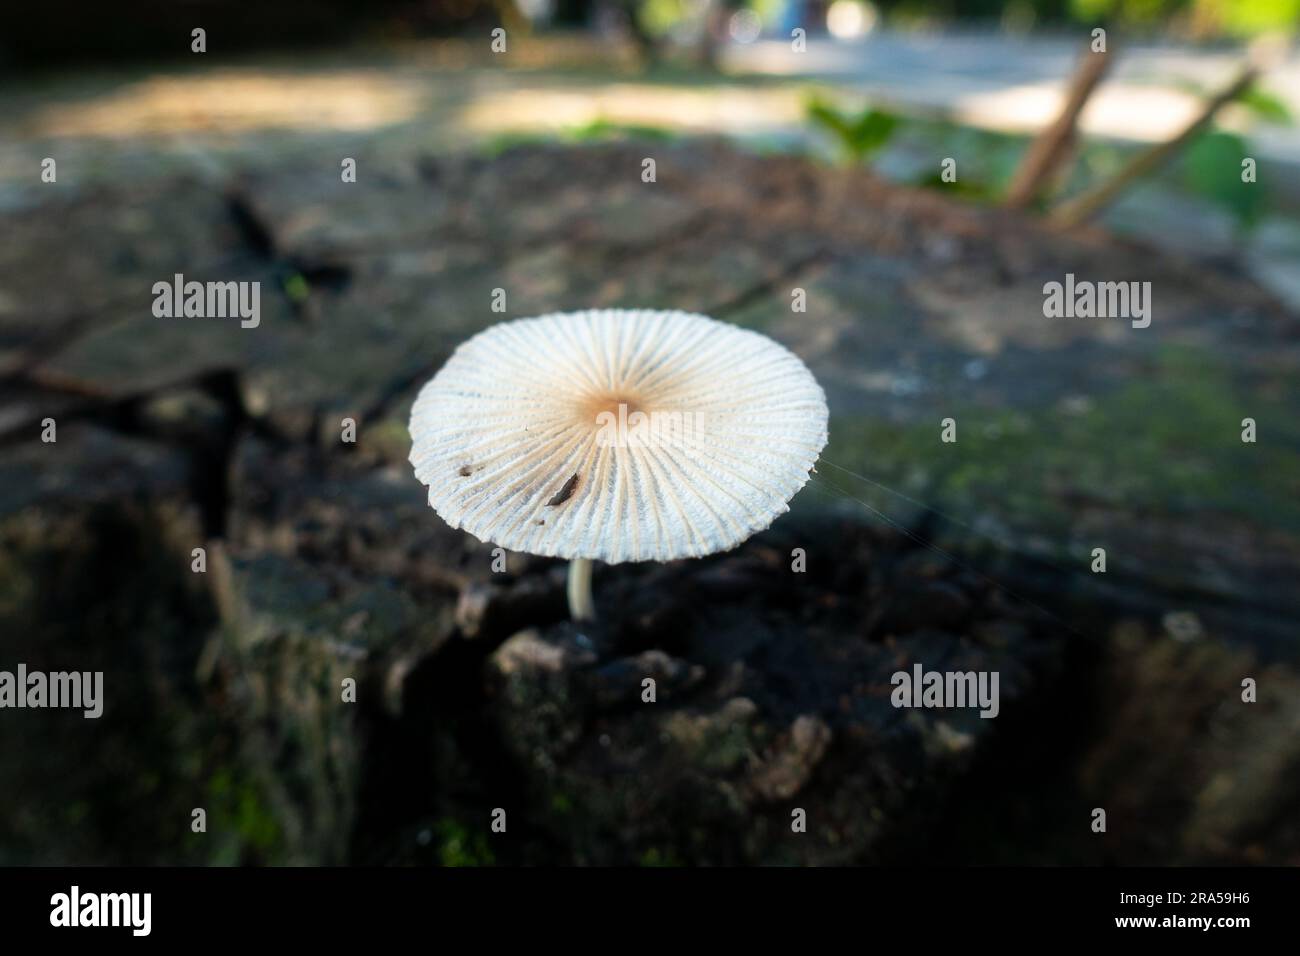 Pleated inkcap Mushroom emerging from a wet humid wooden stump. Parasola plicatilis is a small saprotrophic mushroom with a plicate cap. India Stock Photo